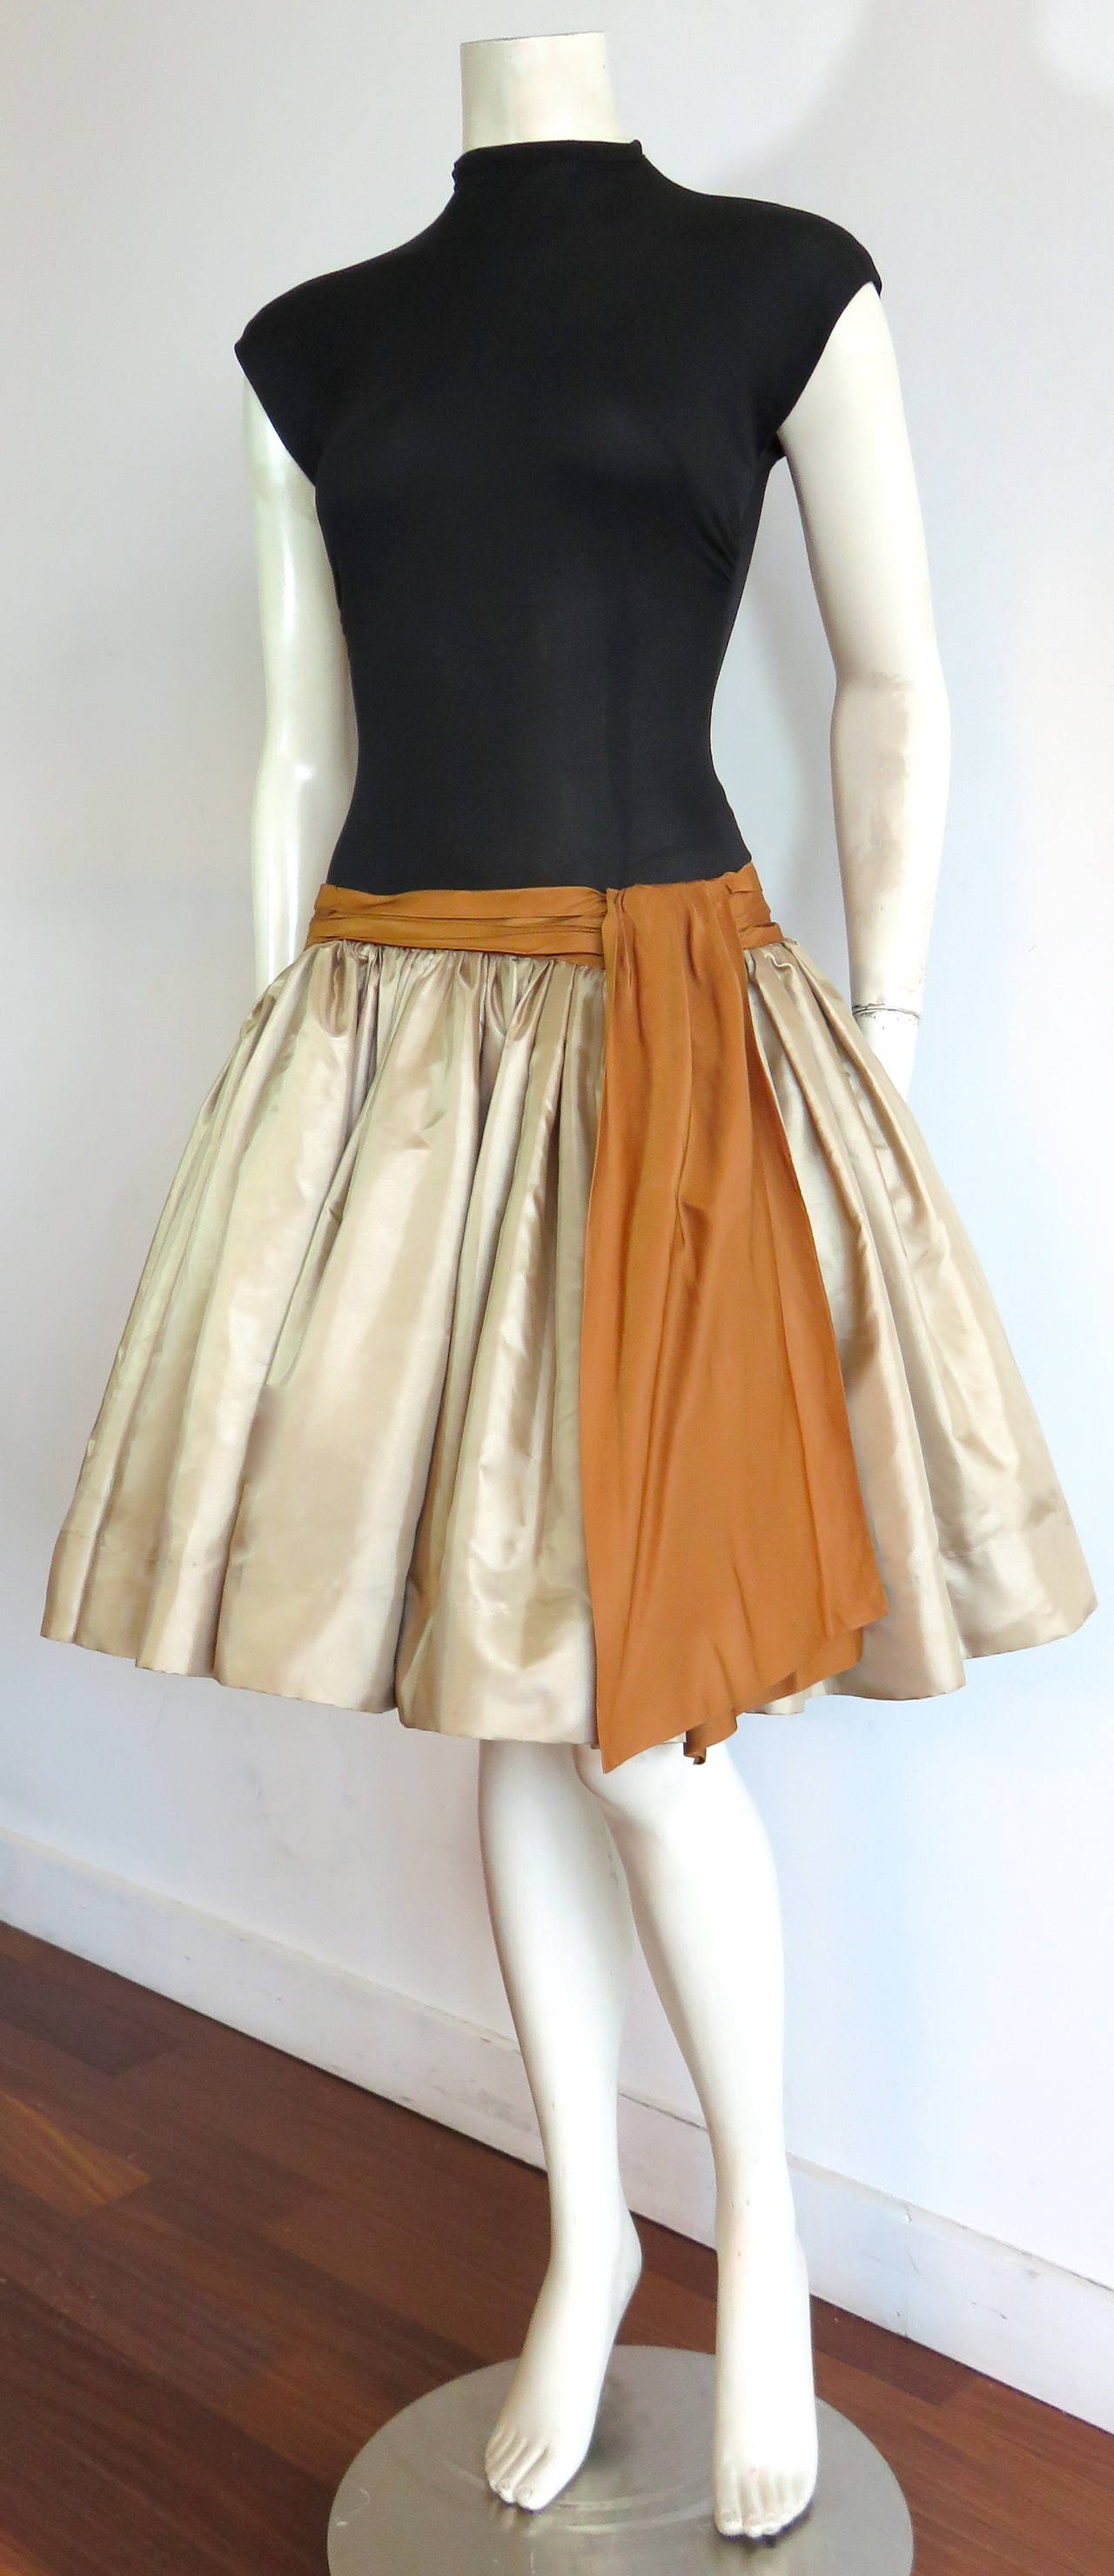 1950's SUZY PERETTE Bouffant cocktail dress inspired by Christian Dior's New Look.

This adorable dress features a wonderful color combination with a golden taffeta full skirt, and bronze sash detail. 

Dropped, fitted waist silhouette with